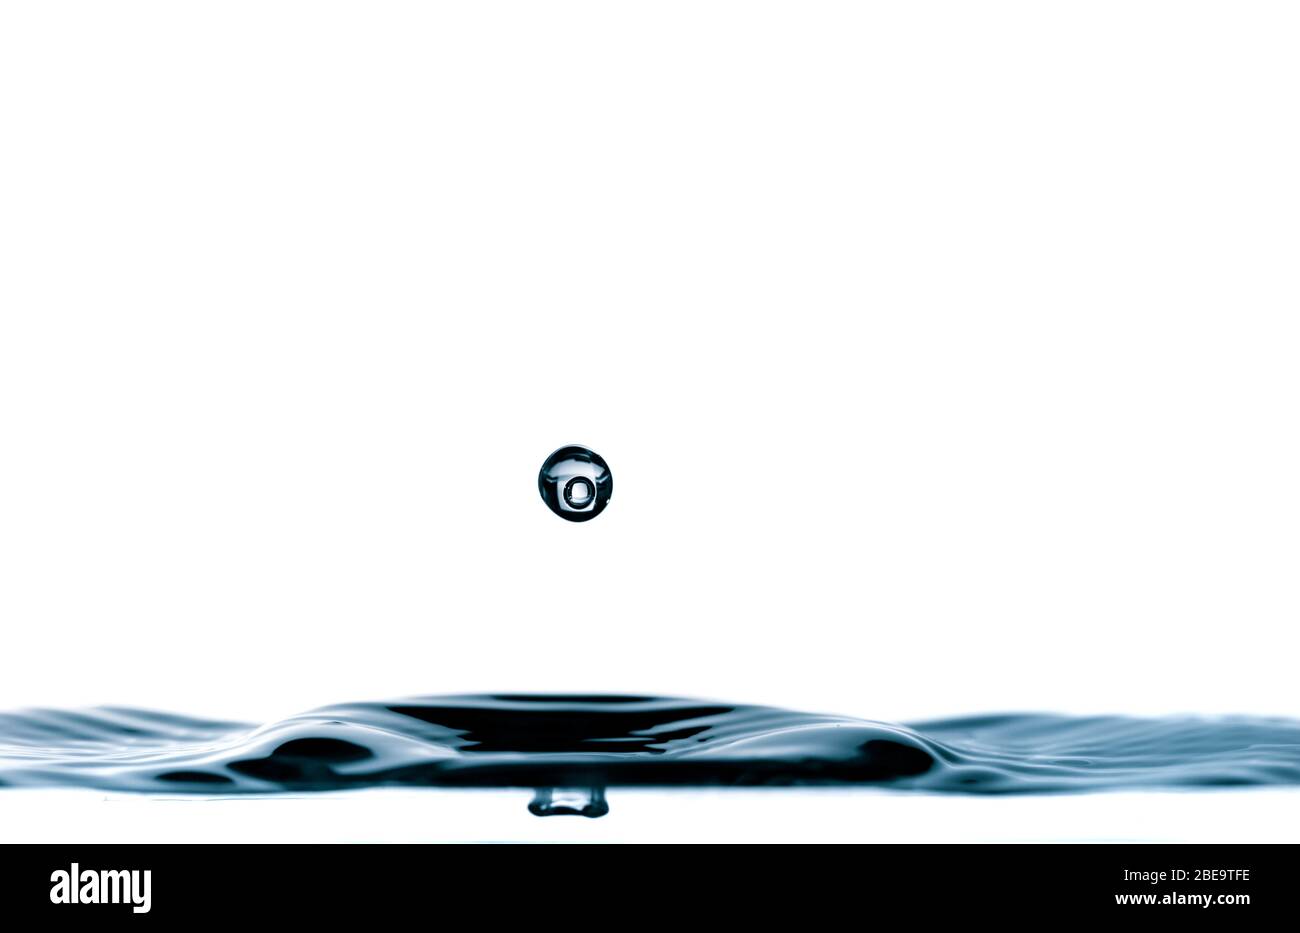 Drop of water drop to the surface. Waves on the surface of the water from a collision Stock Photo